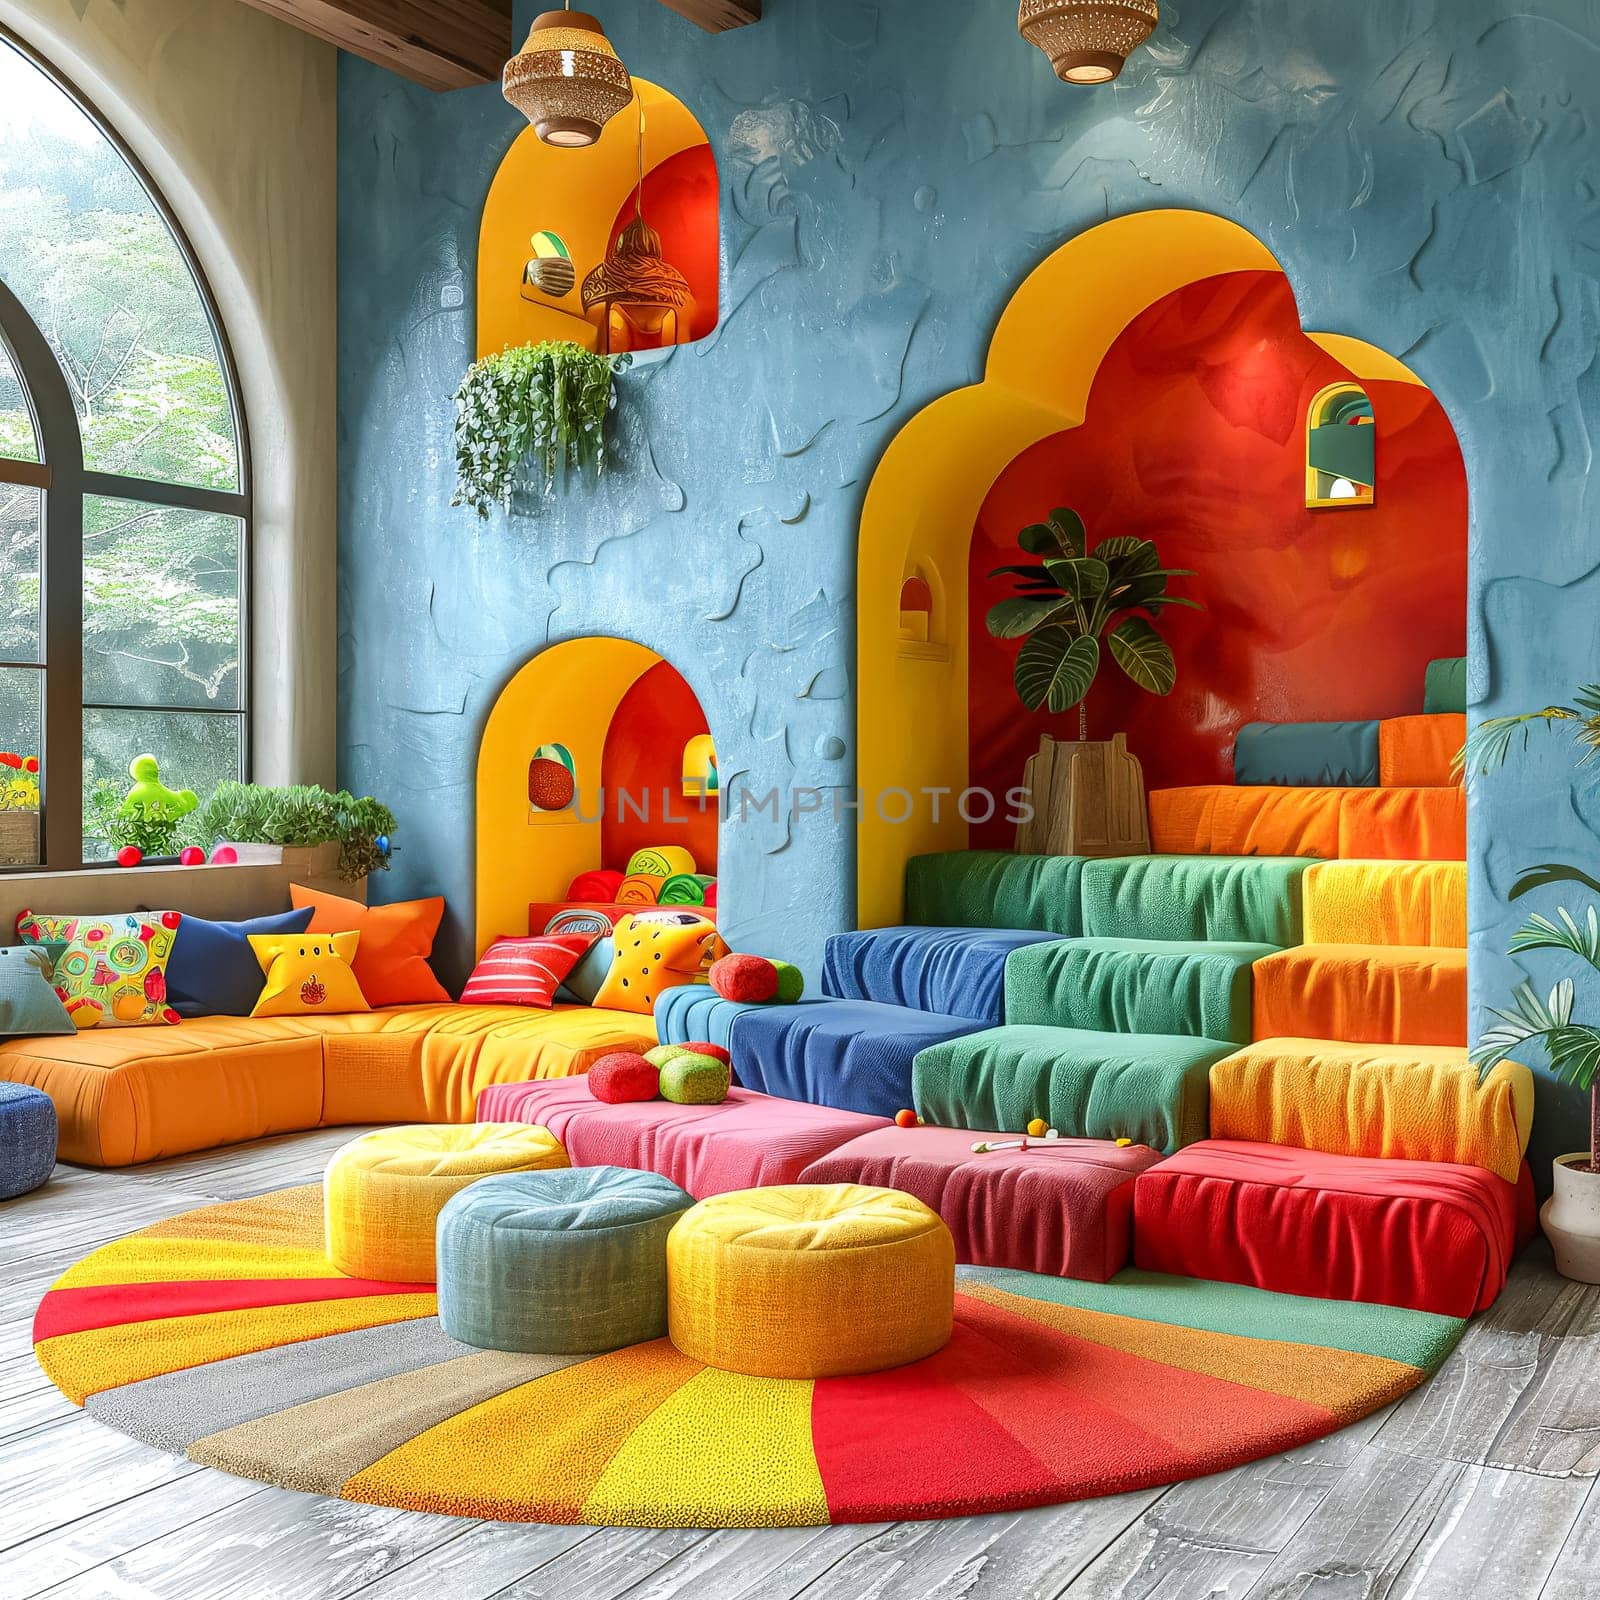 A colorful room with a rainbow rug and pillows. The room has a playful and cheerful atmosphere